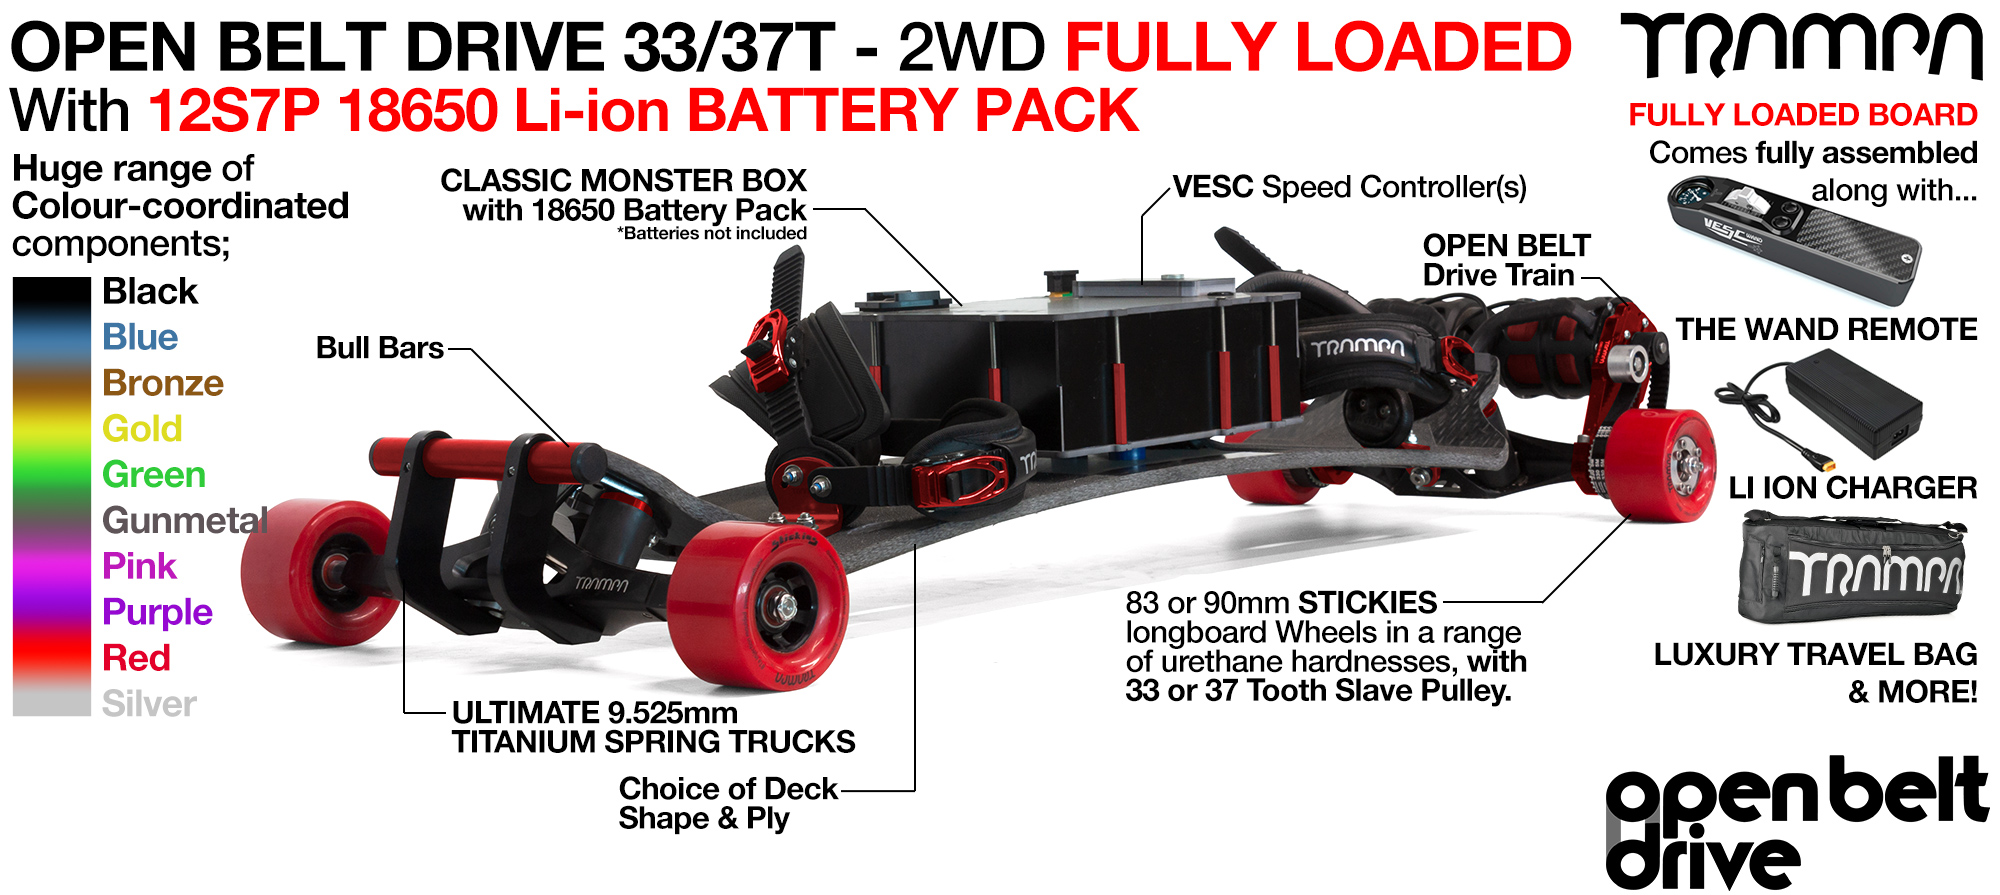 2WD 66T Open Belt Drive TRAMPA E-MTB with 83 or 90mm STICKIES Wheels & 33/37 Tooth Pulleys - FULLY LOADED 18650 CELL Pack